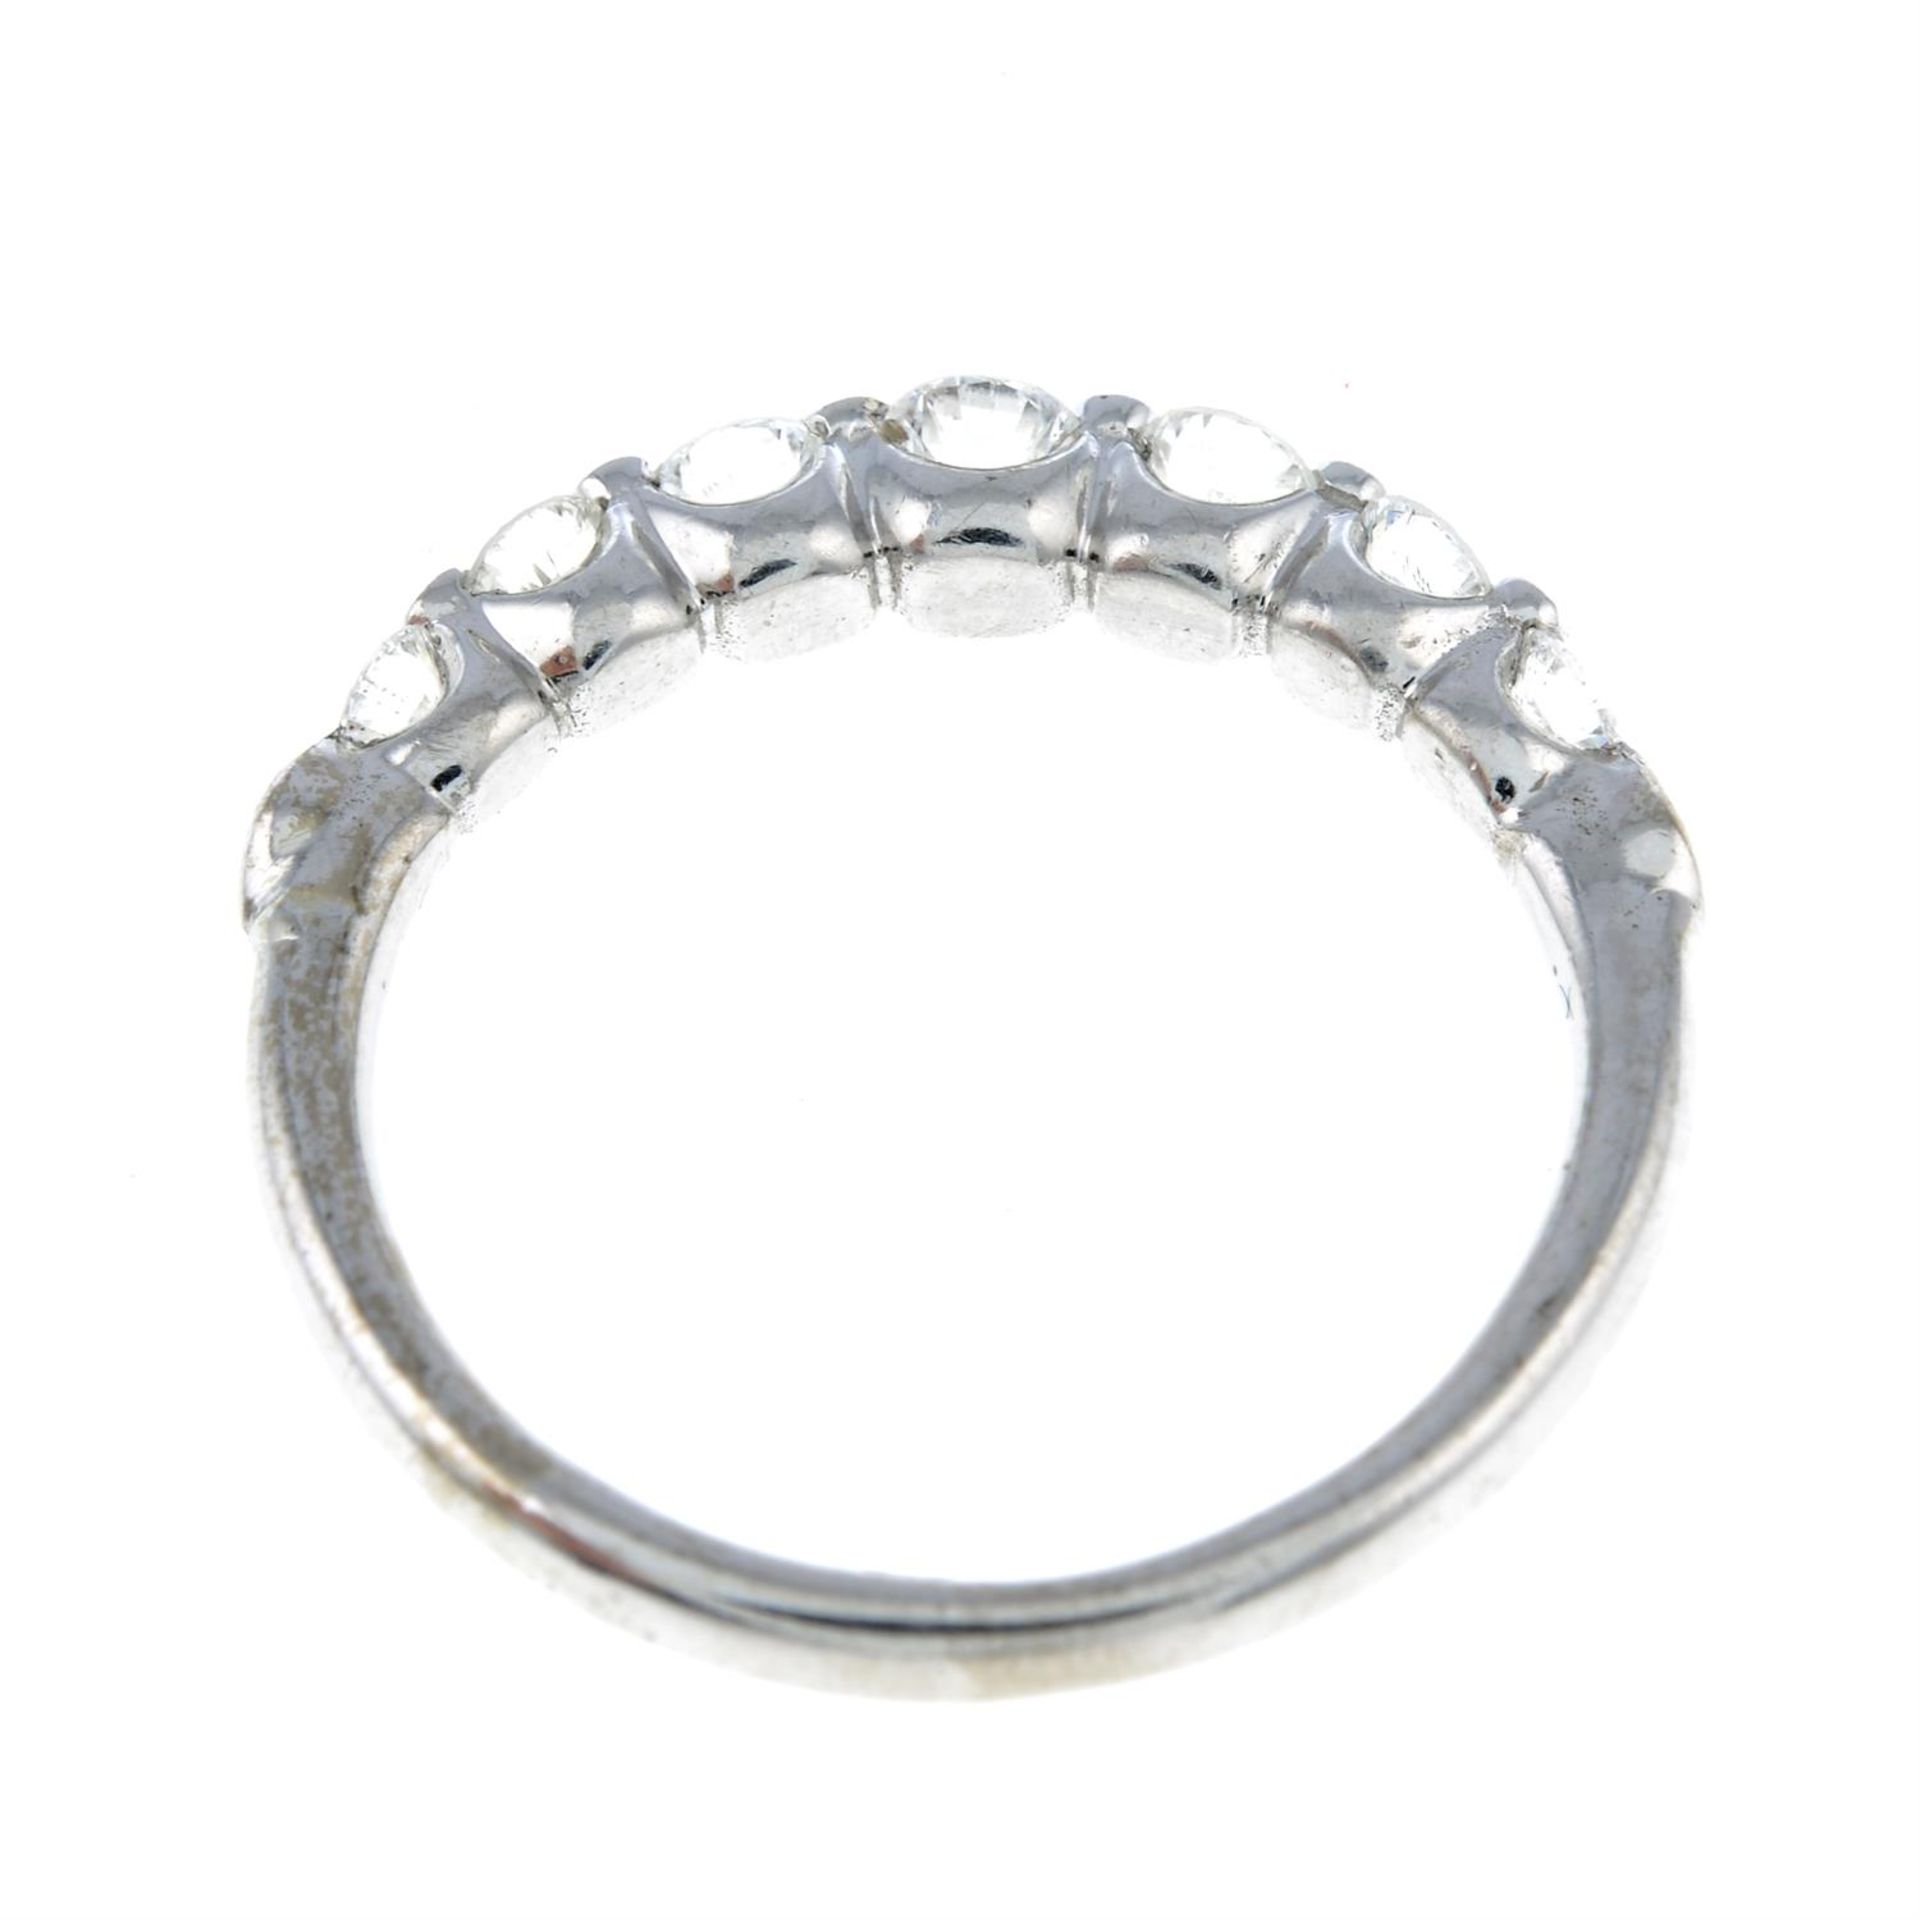 An 18ct gold brilliant-cut diamond seven-stone ring, with diamond spacers. - Image 2 of 2